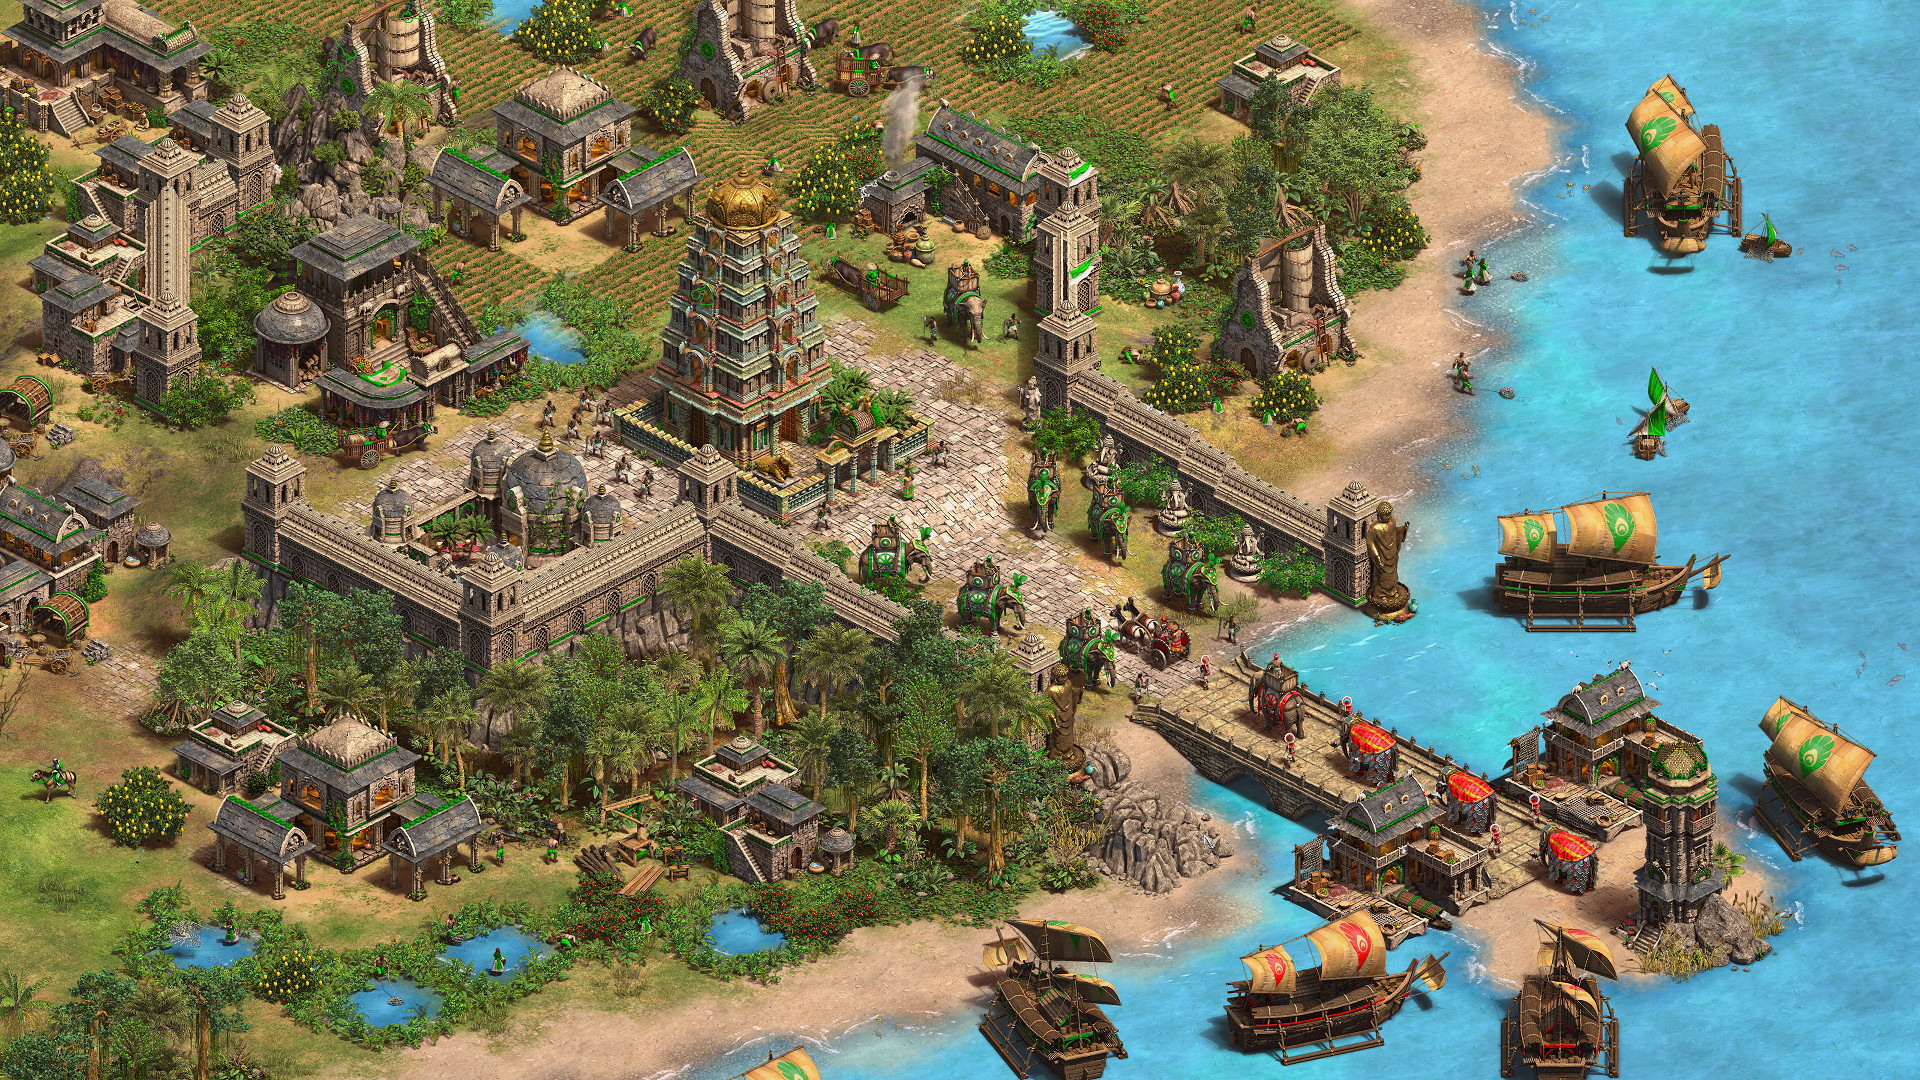 Age of Empires II: Definitive Edition - Dynasties of India - screenshot 1